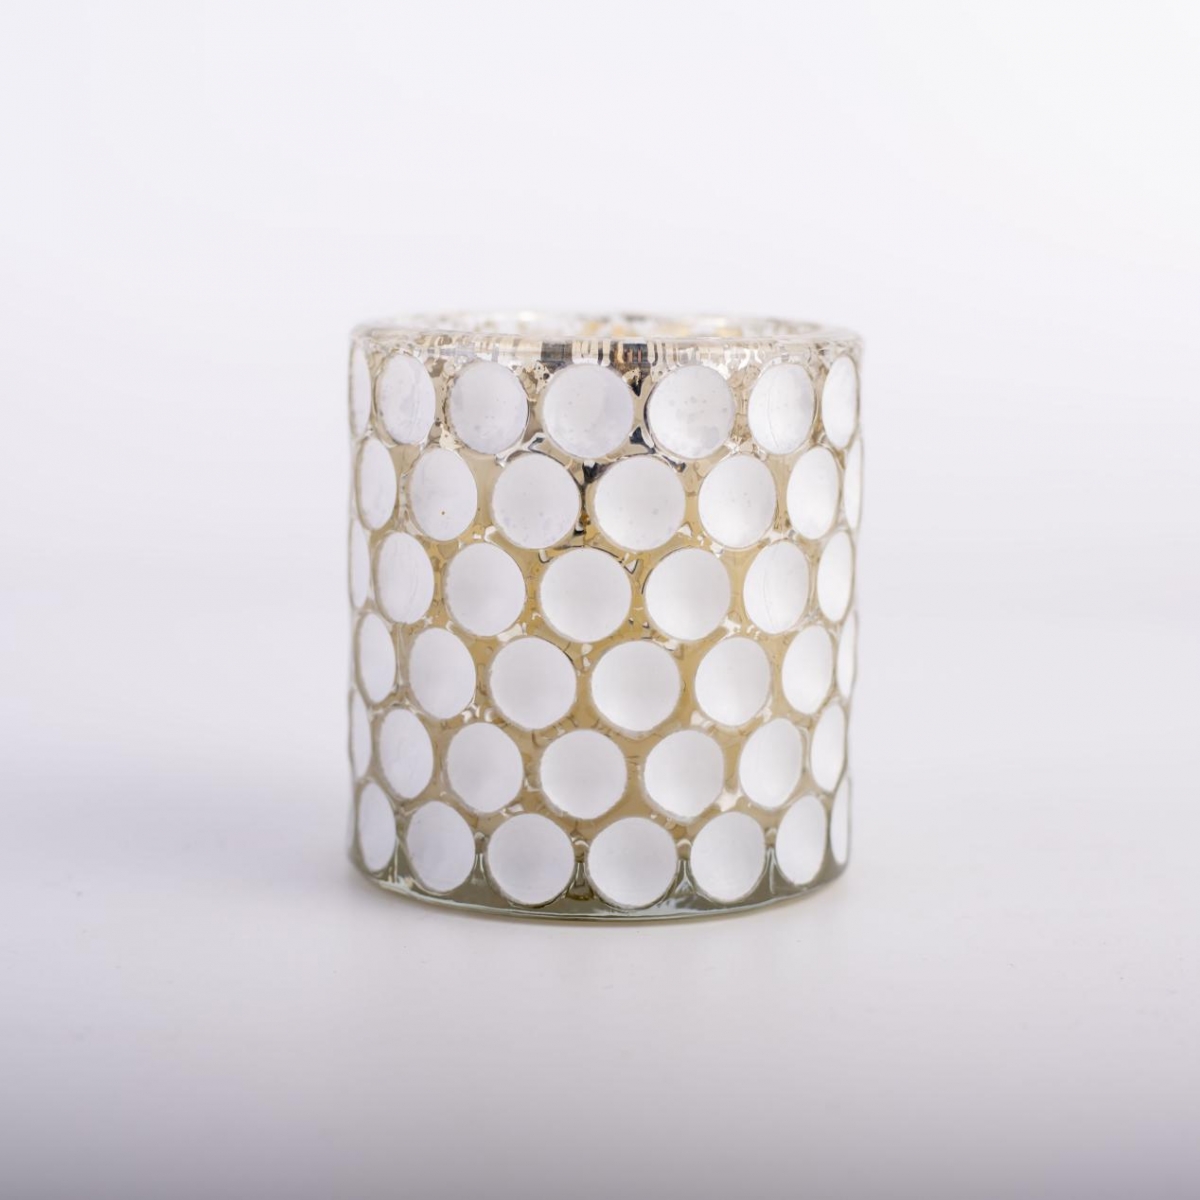 Scented Candles- Best Soy Candles ,Polishing White Honeycomb Embossed Glass Jar ,Christmas Candles ,China Factory ,Price-HOWCANDLE-Candles,Scented Candles,Aromatherapy Candles,Soy Candles,Vegan Candles,Jar Candles,Pillar Candles,Candle Gift Sets,Essential Oils,Reed Diffuser,Candle Holder,